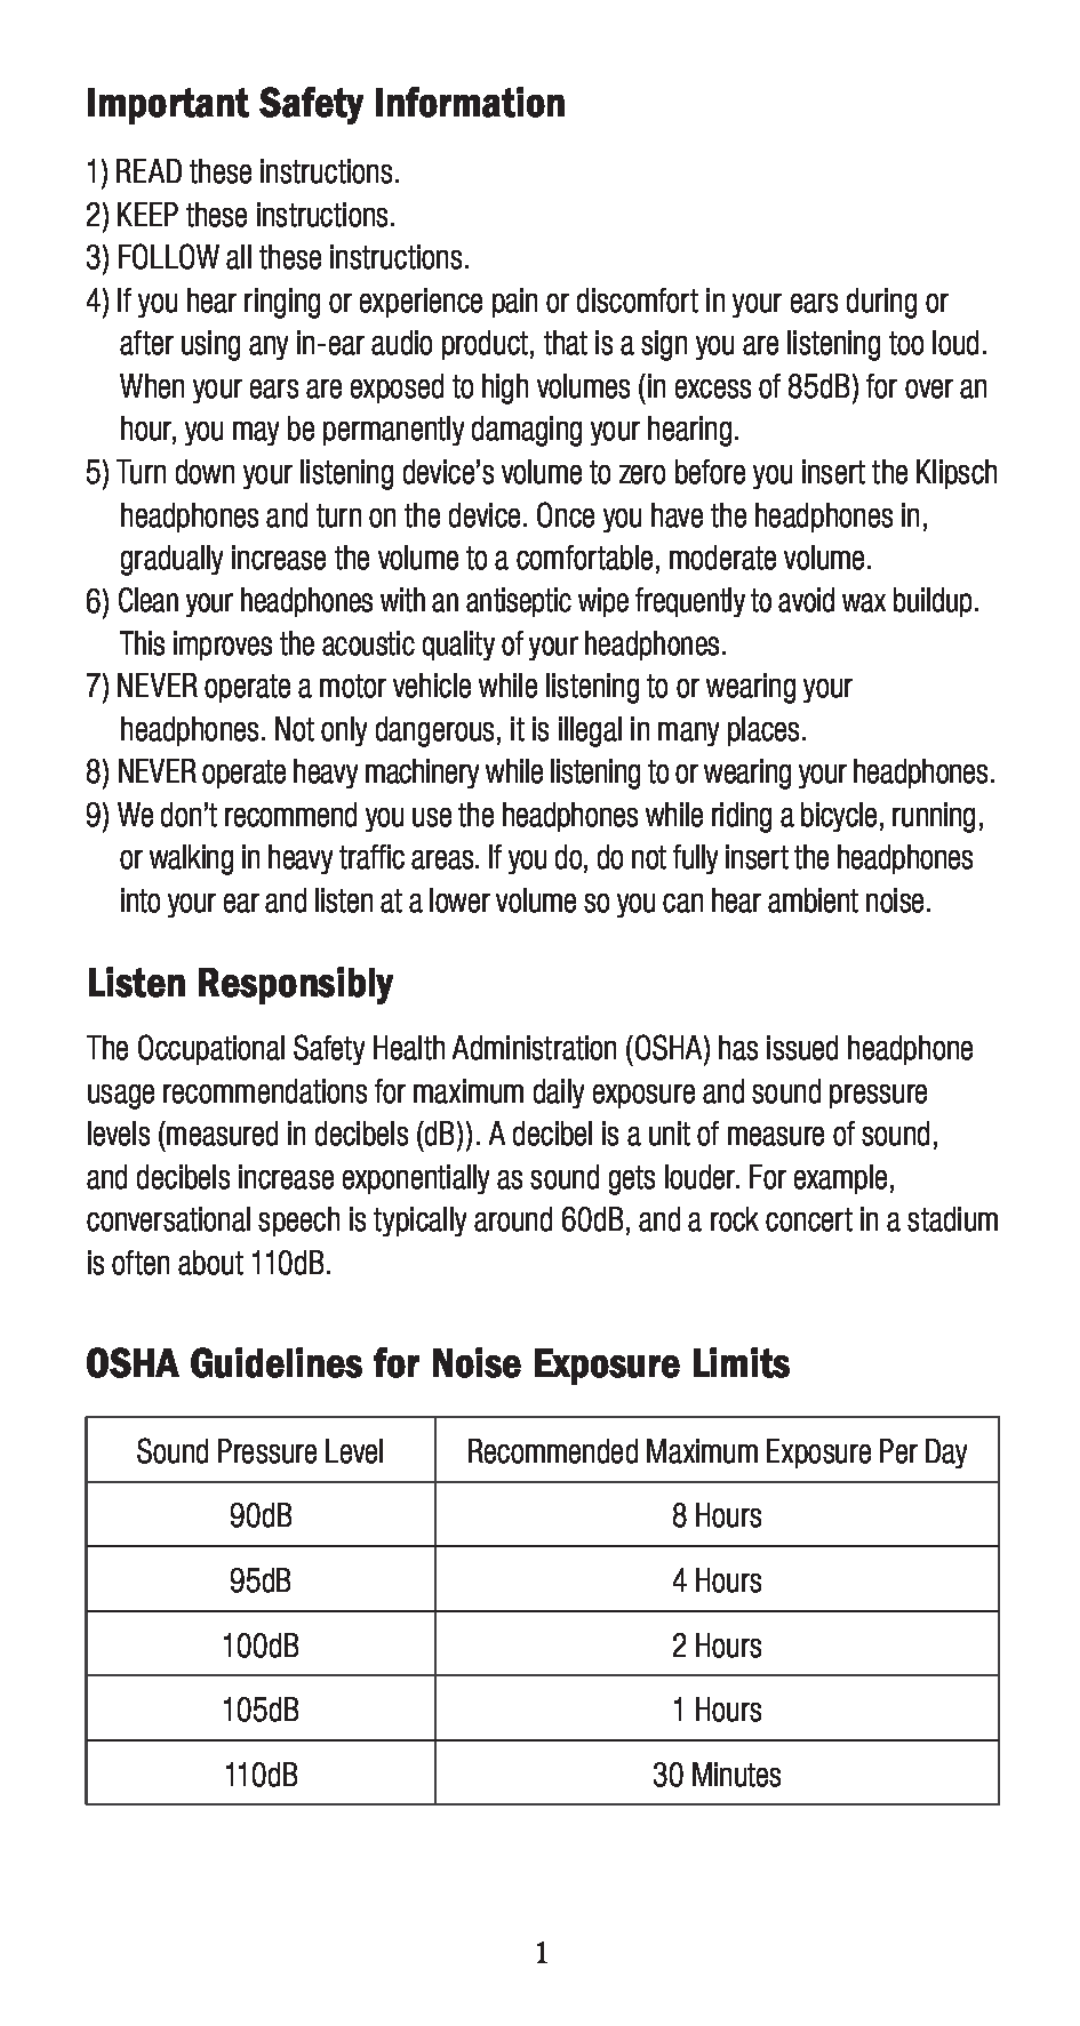 Klipsch 1010950 owner manual Important Safety Information, Listen Responsibly, OSHA Guidelines for Noise Exposure Limits 